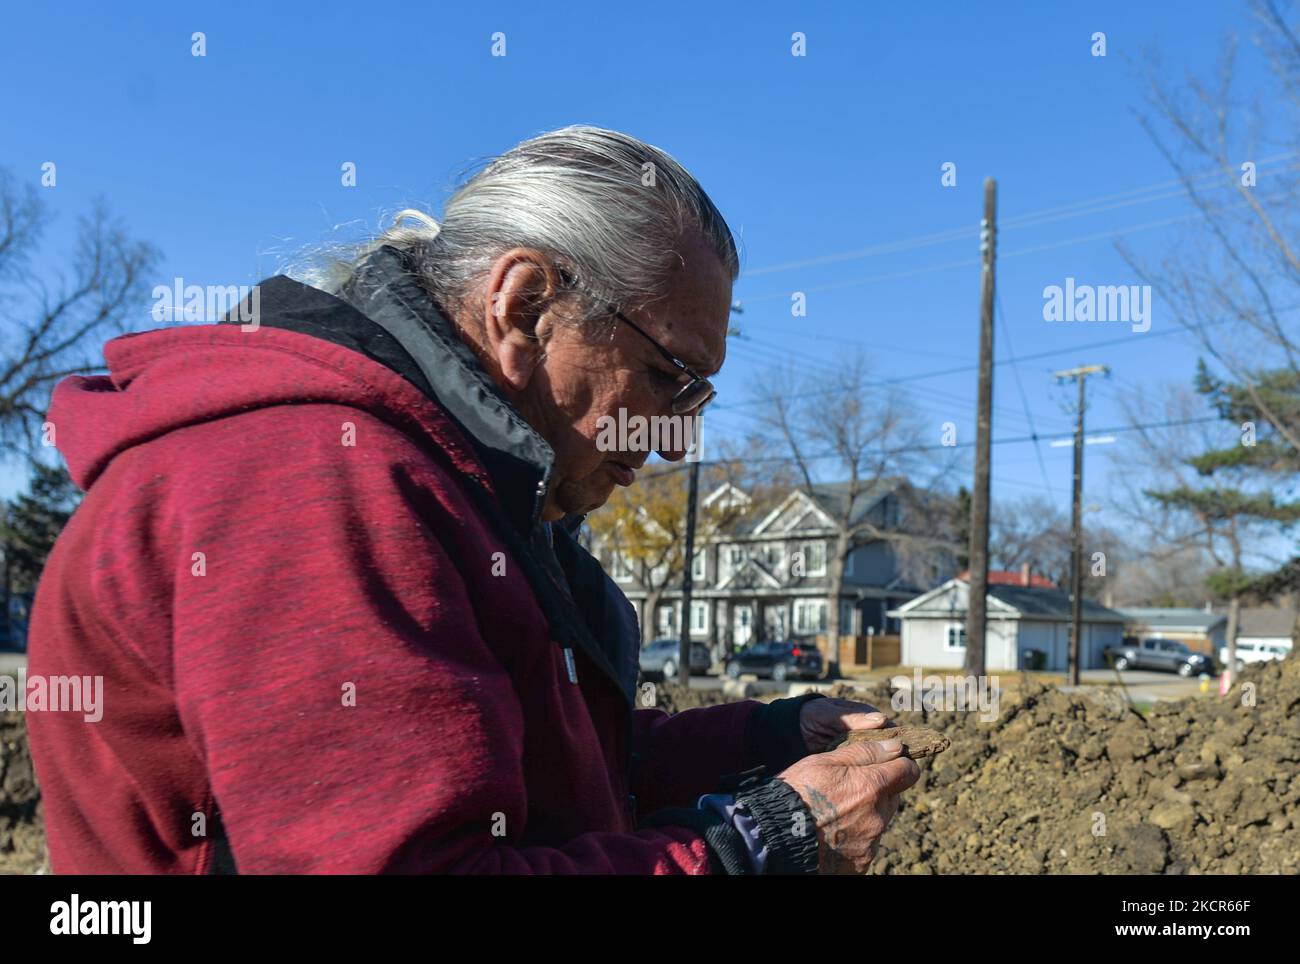 Elder Fernie Marty from the Papaschase First Nation, monitors excavations on the grounds of the former Charles Camsell Hospital, in Edmonton. Second phase of excavation work began today at the site of the former Charles Camsell Hospital, the Edmonton facility that for decades was used to treat Indigenous people with tuberculosis. First Nation members have been calling for construction to stop at the grounds where many believe patients may have been buried. The search is being funded by the property's developer. On Thursday, 21 October 2021, in Inglewood, Edmonton, Alberta, Canada. (Photo by Ar Stock Photo